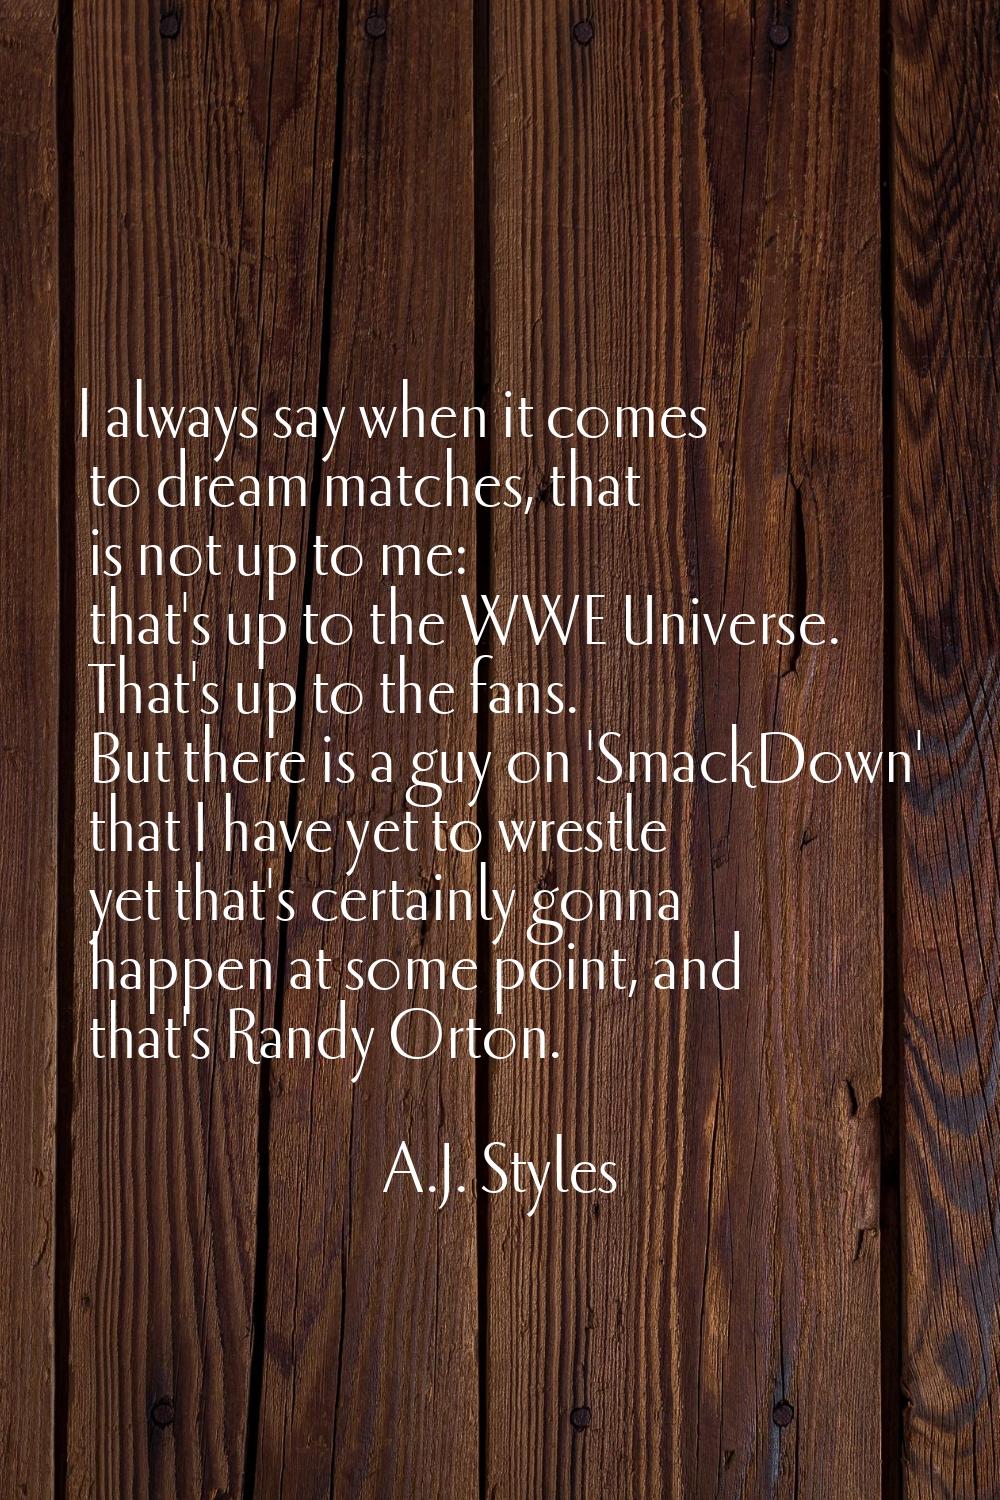 I always say when it comes to dream matches, that is not up to me: that's up to the WWE Universe. T